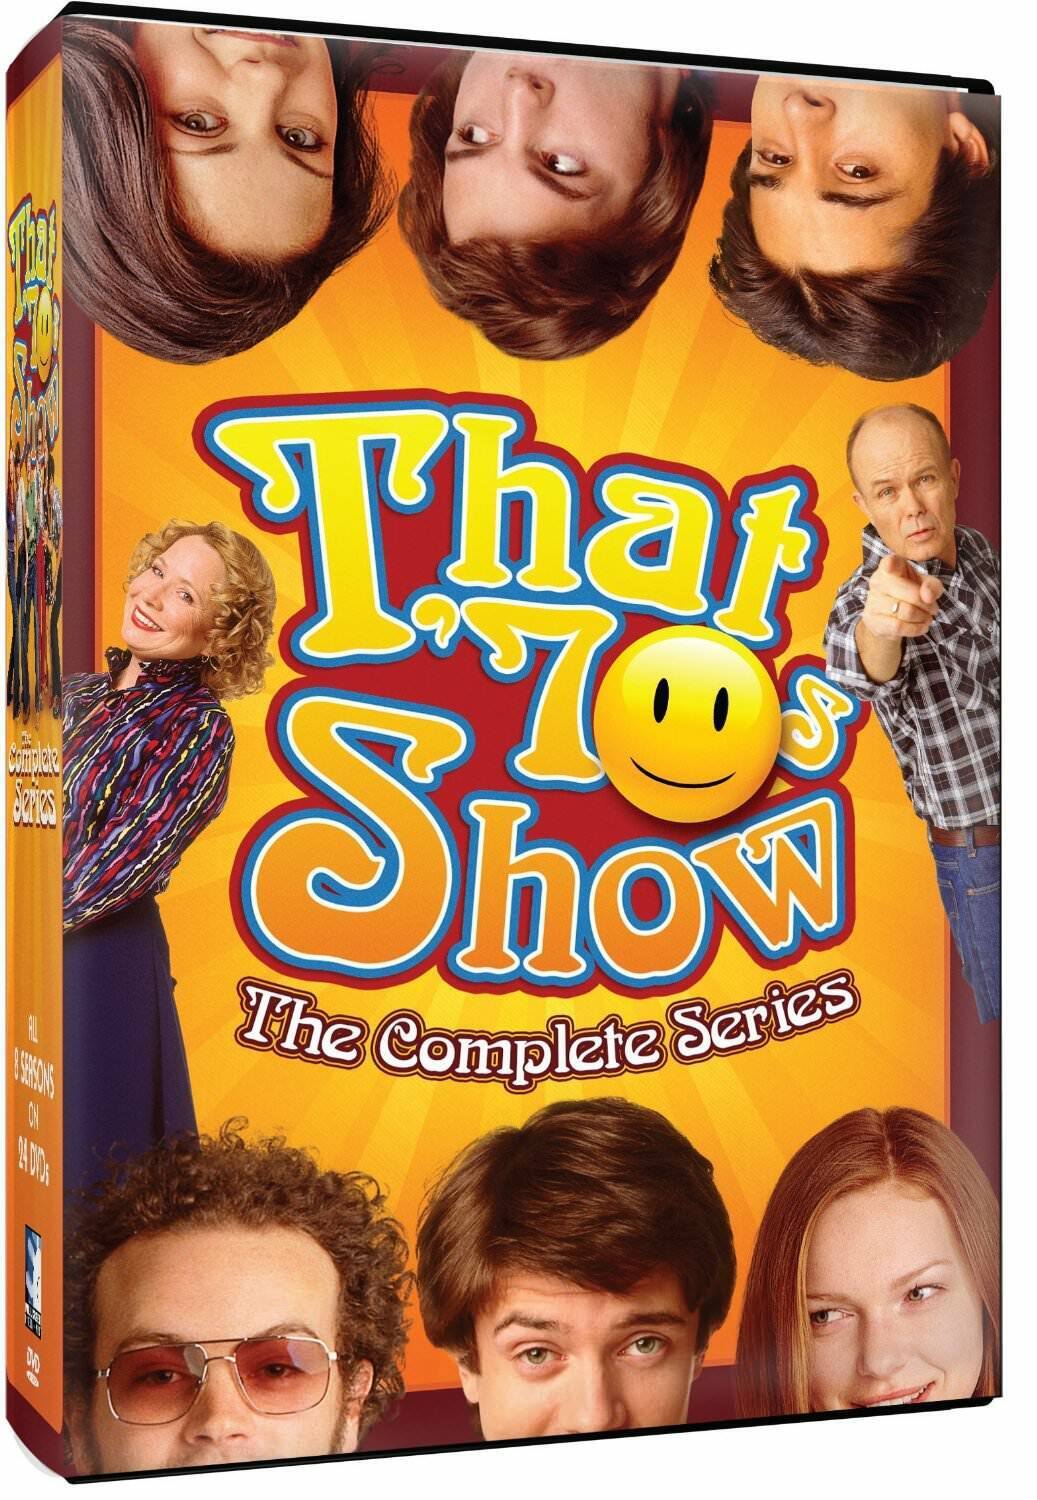 That '70s Show: The Complete Series (DVD, 2013, 24-Disc Set)